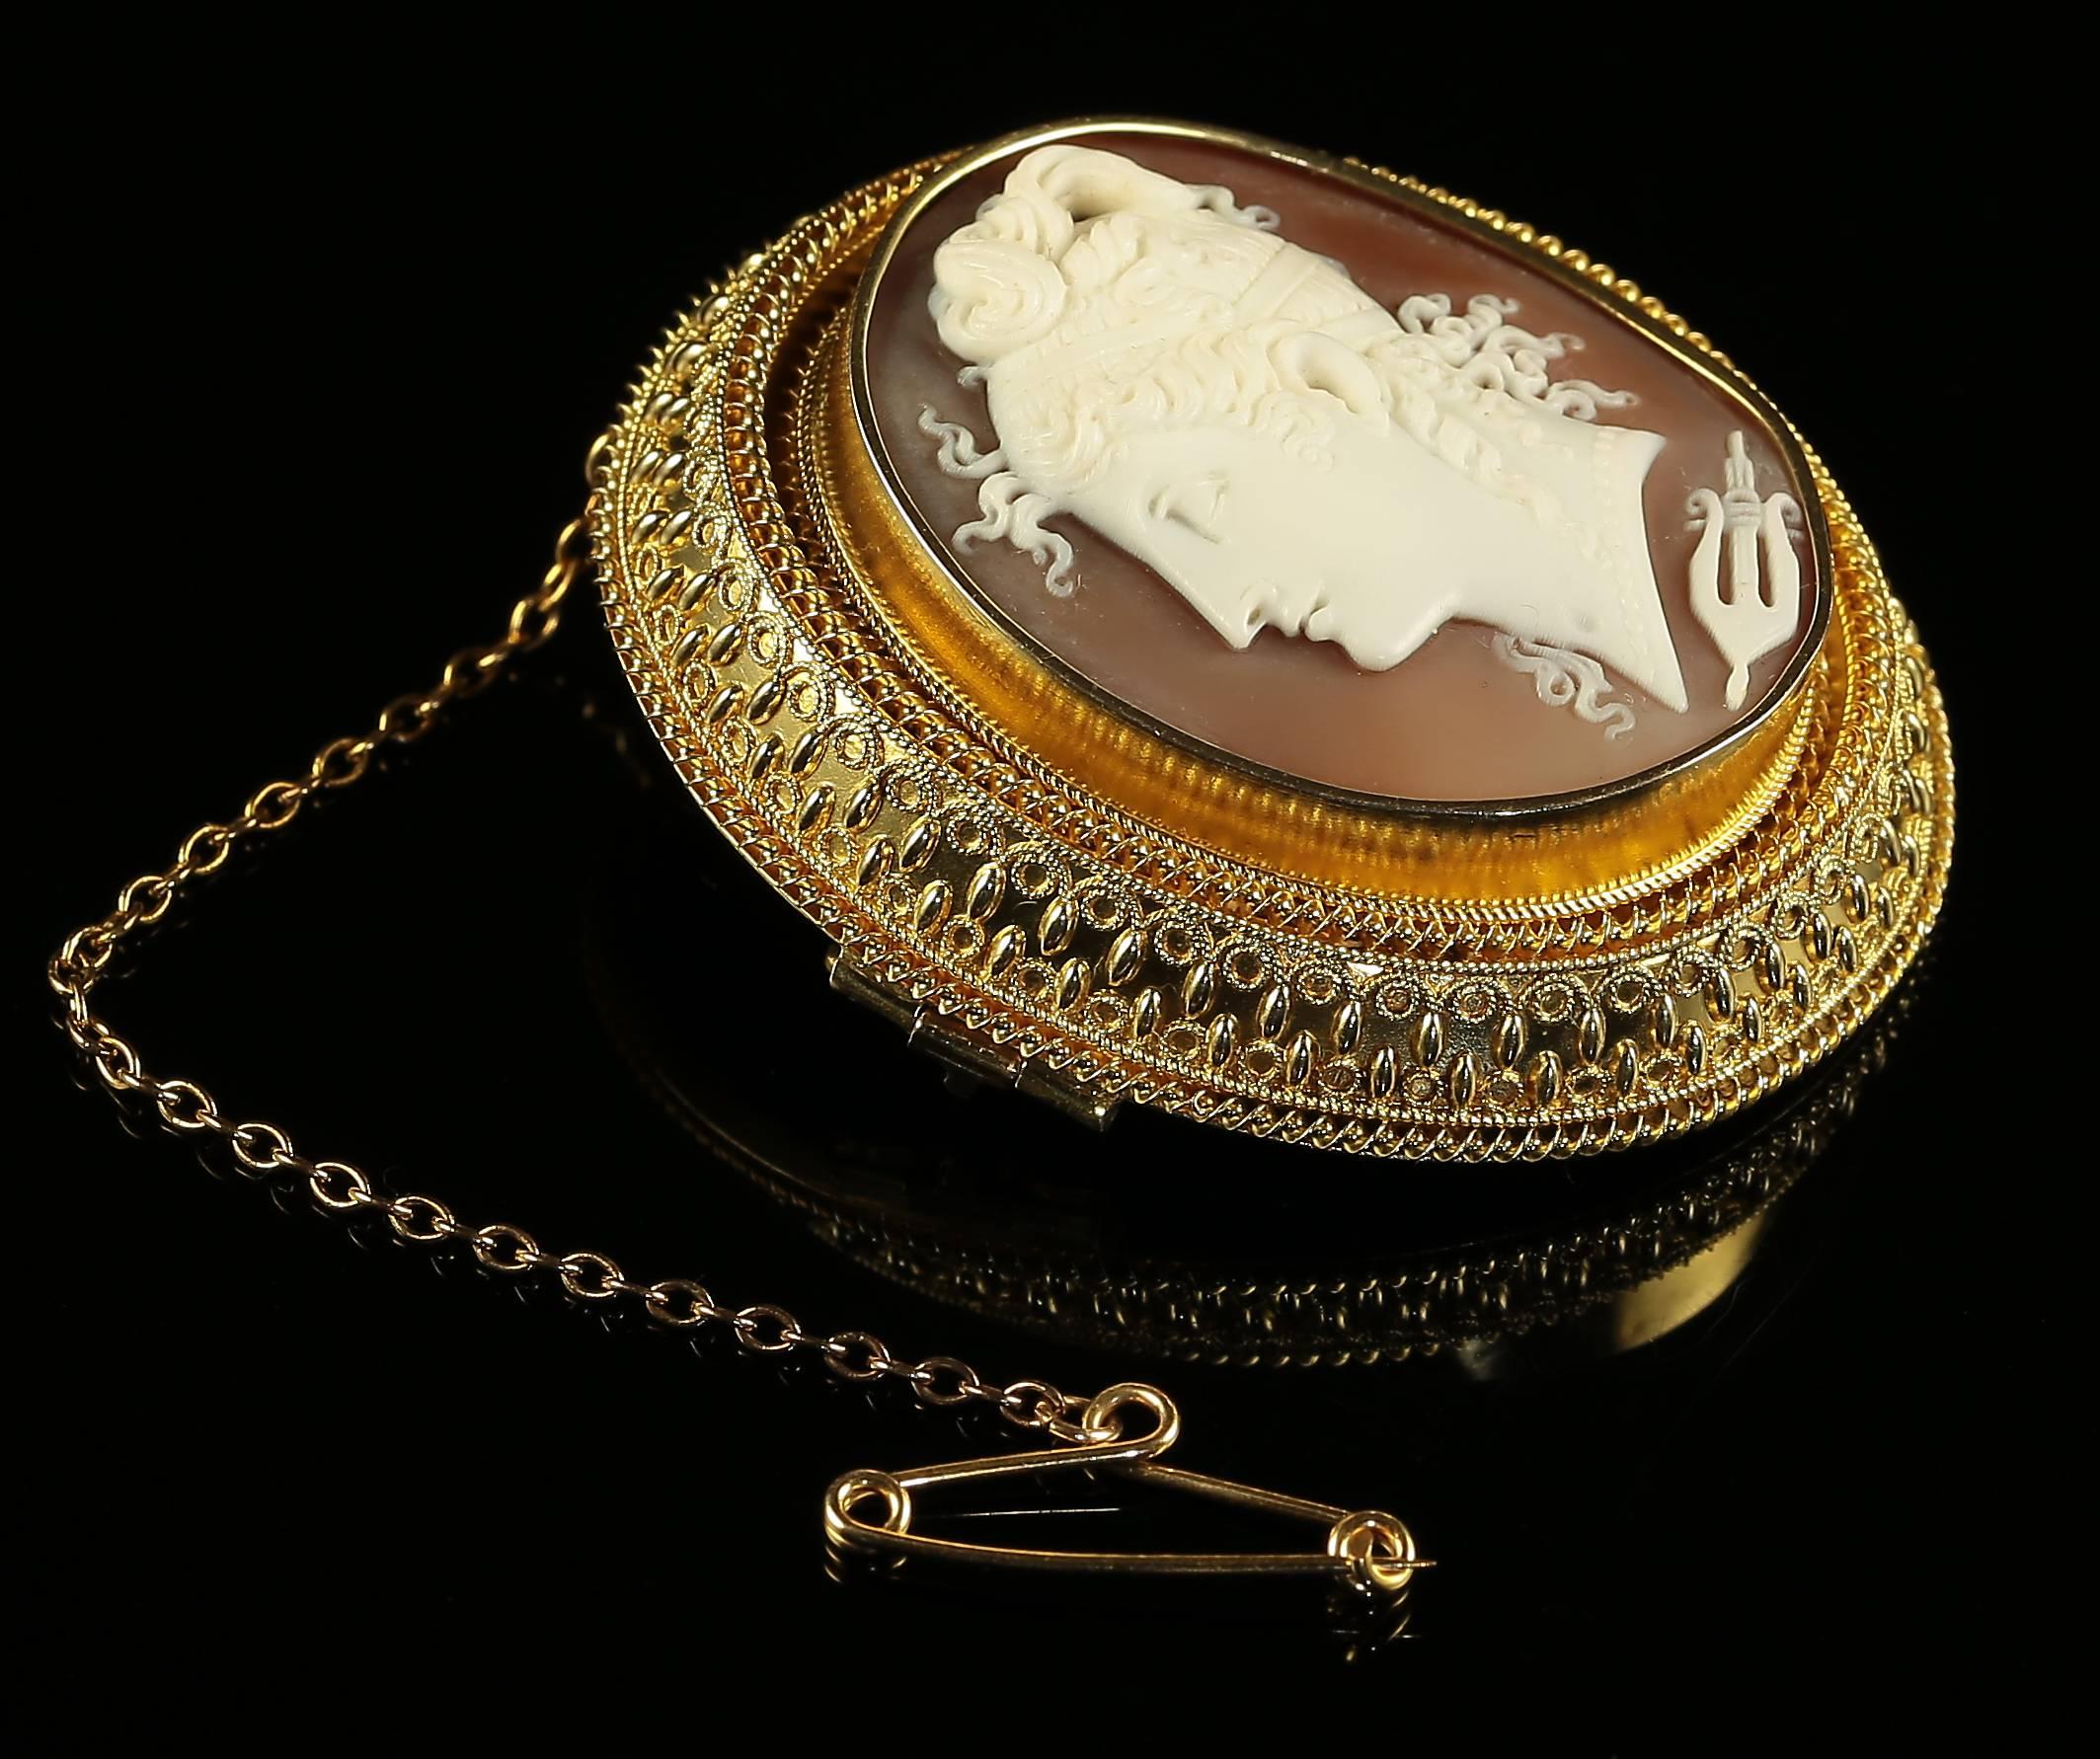 Women's Antique Gold Cameo Brooch with Locket Back circa 1860